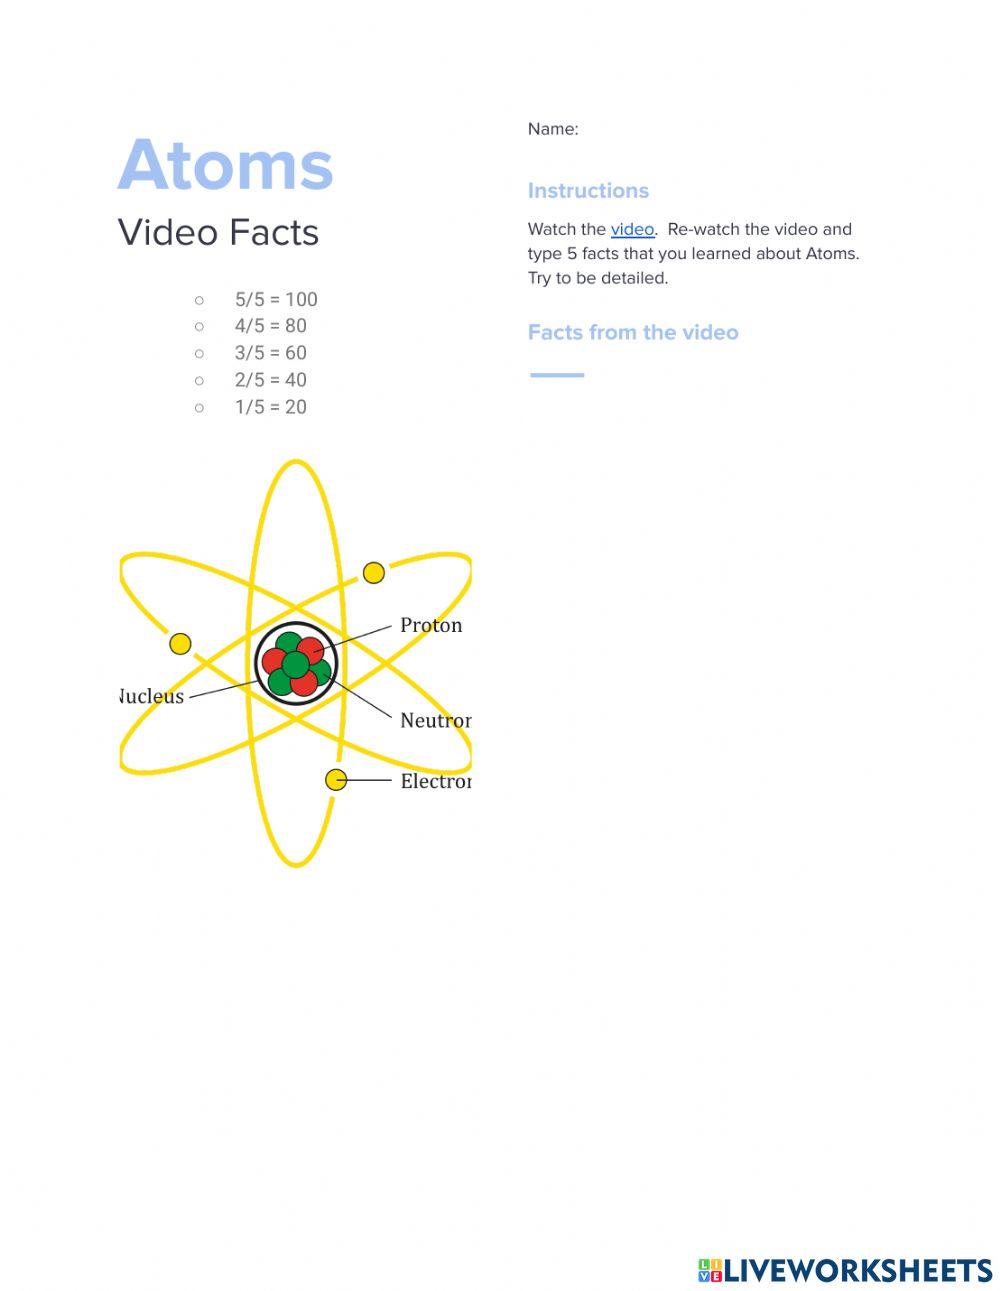 Atoms 5 Video Facts